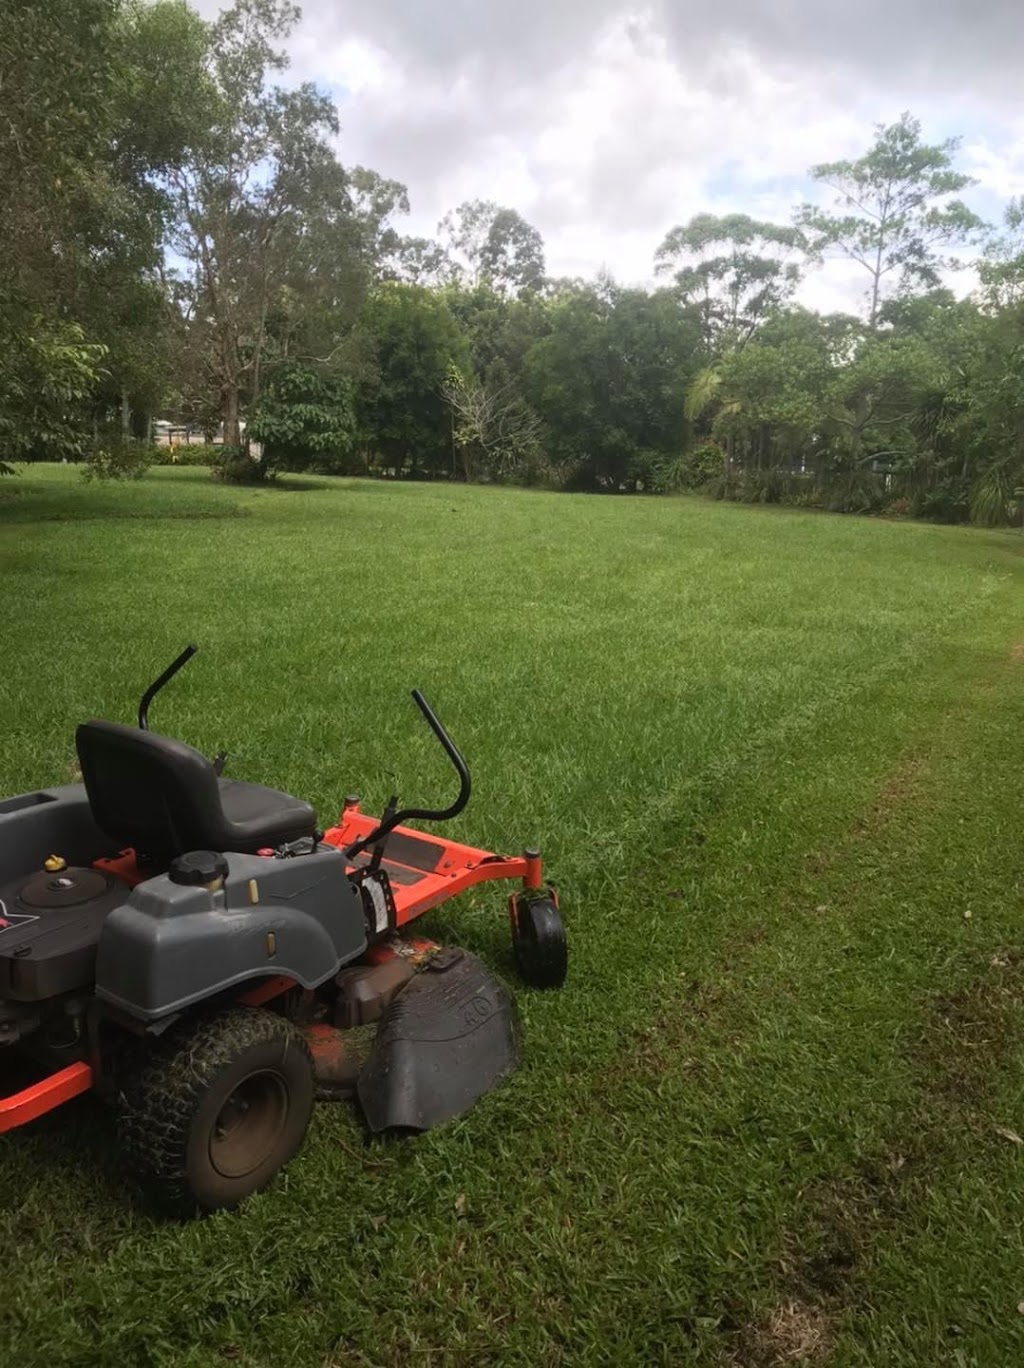 Mates Rates Lawn Mowing Acreage Care |  | Contact for address, Mooloolah Valley QLD 4553, Australia | 0401900500 OR +61 401 900 500